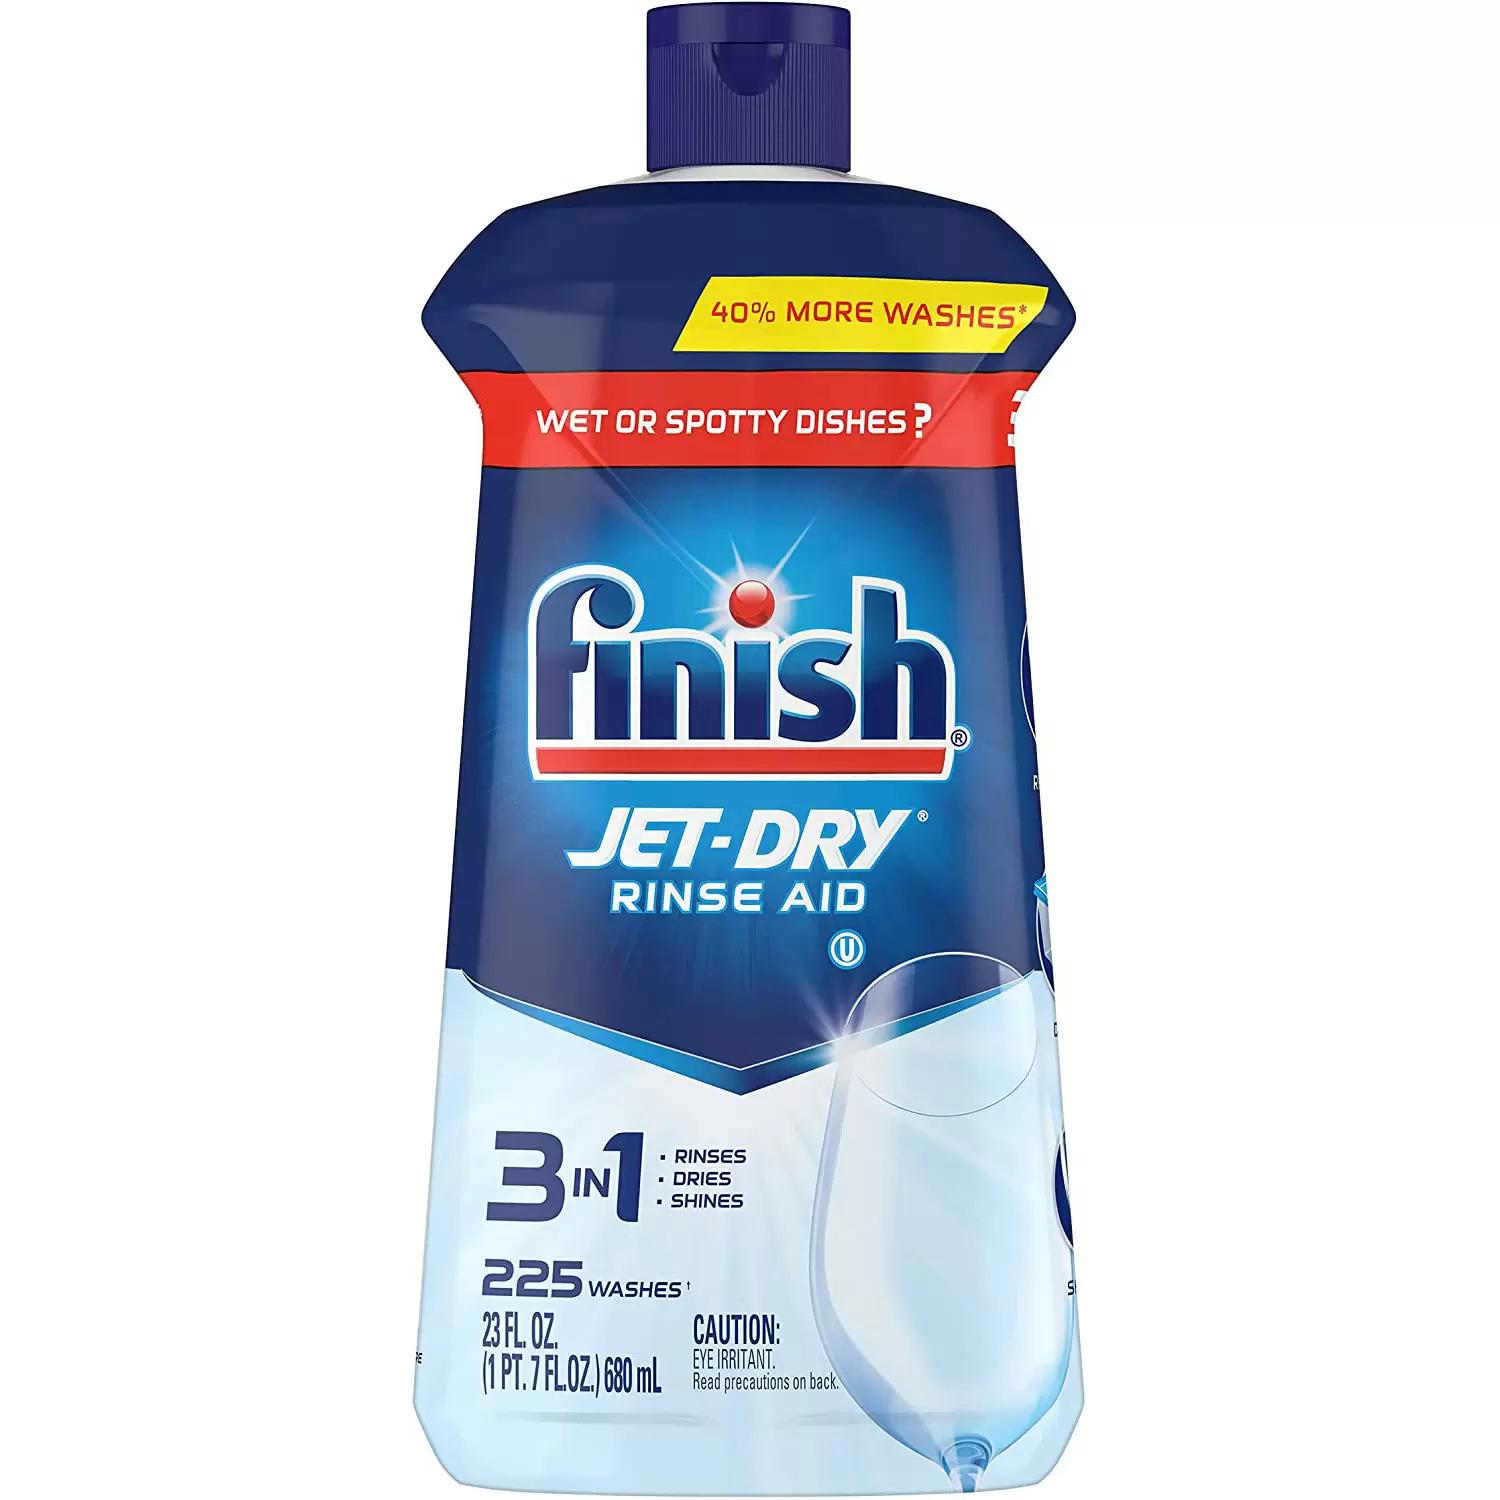 Finish Jet-Dry Rinse Aid for $5.93 Shipped